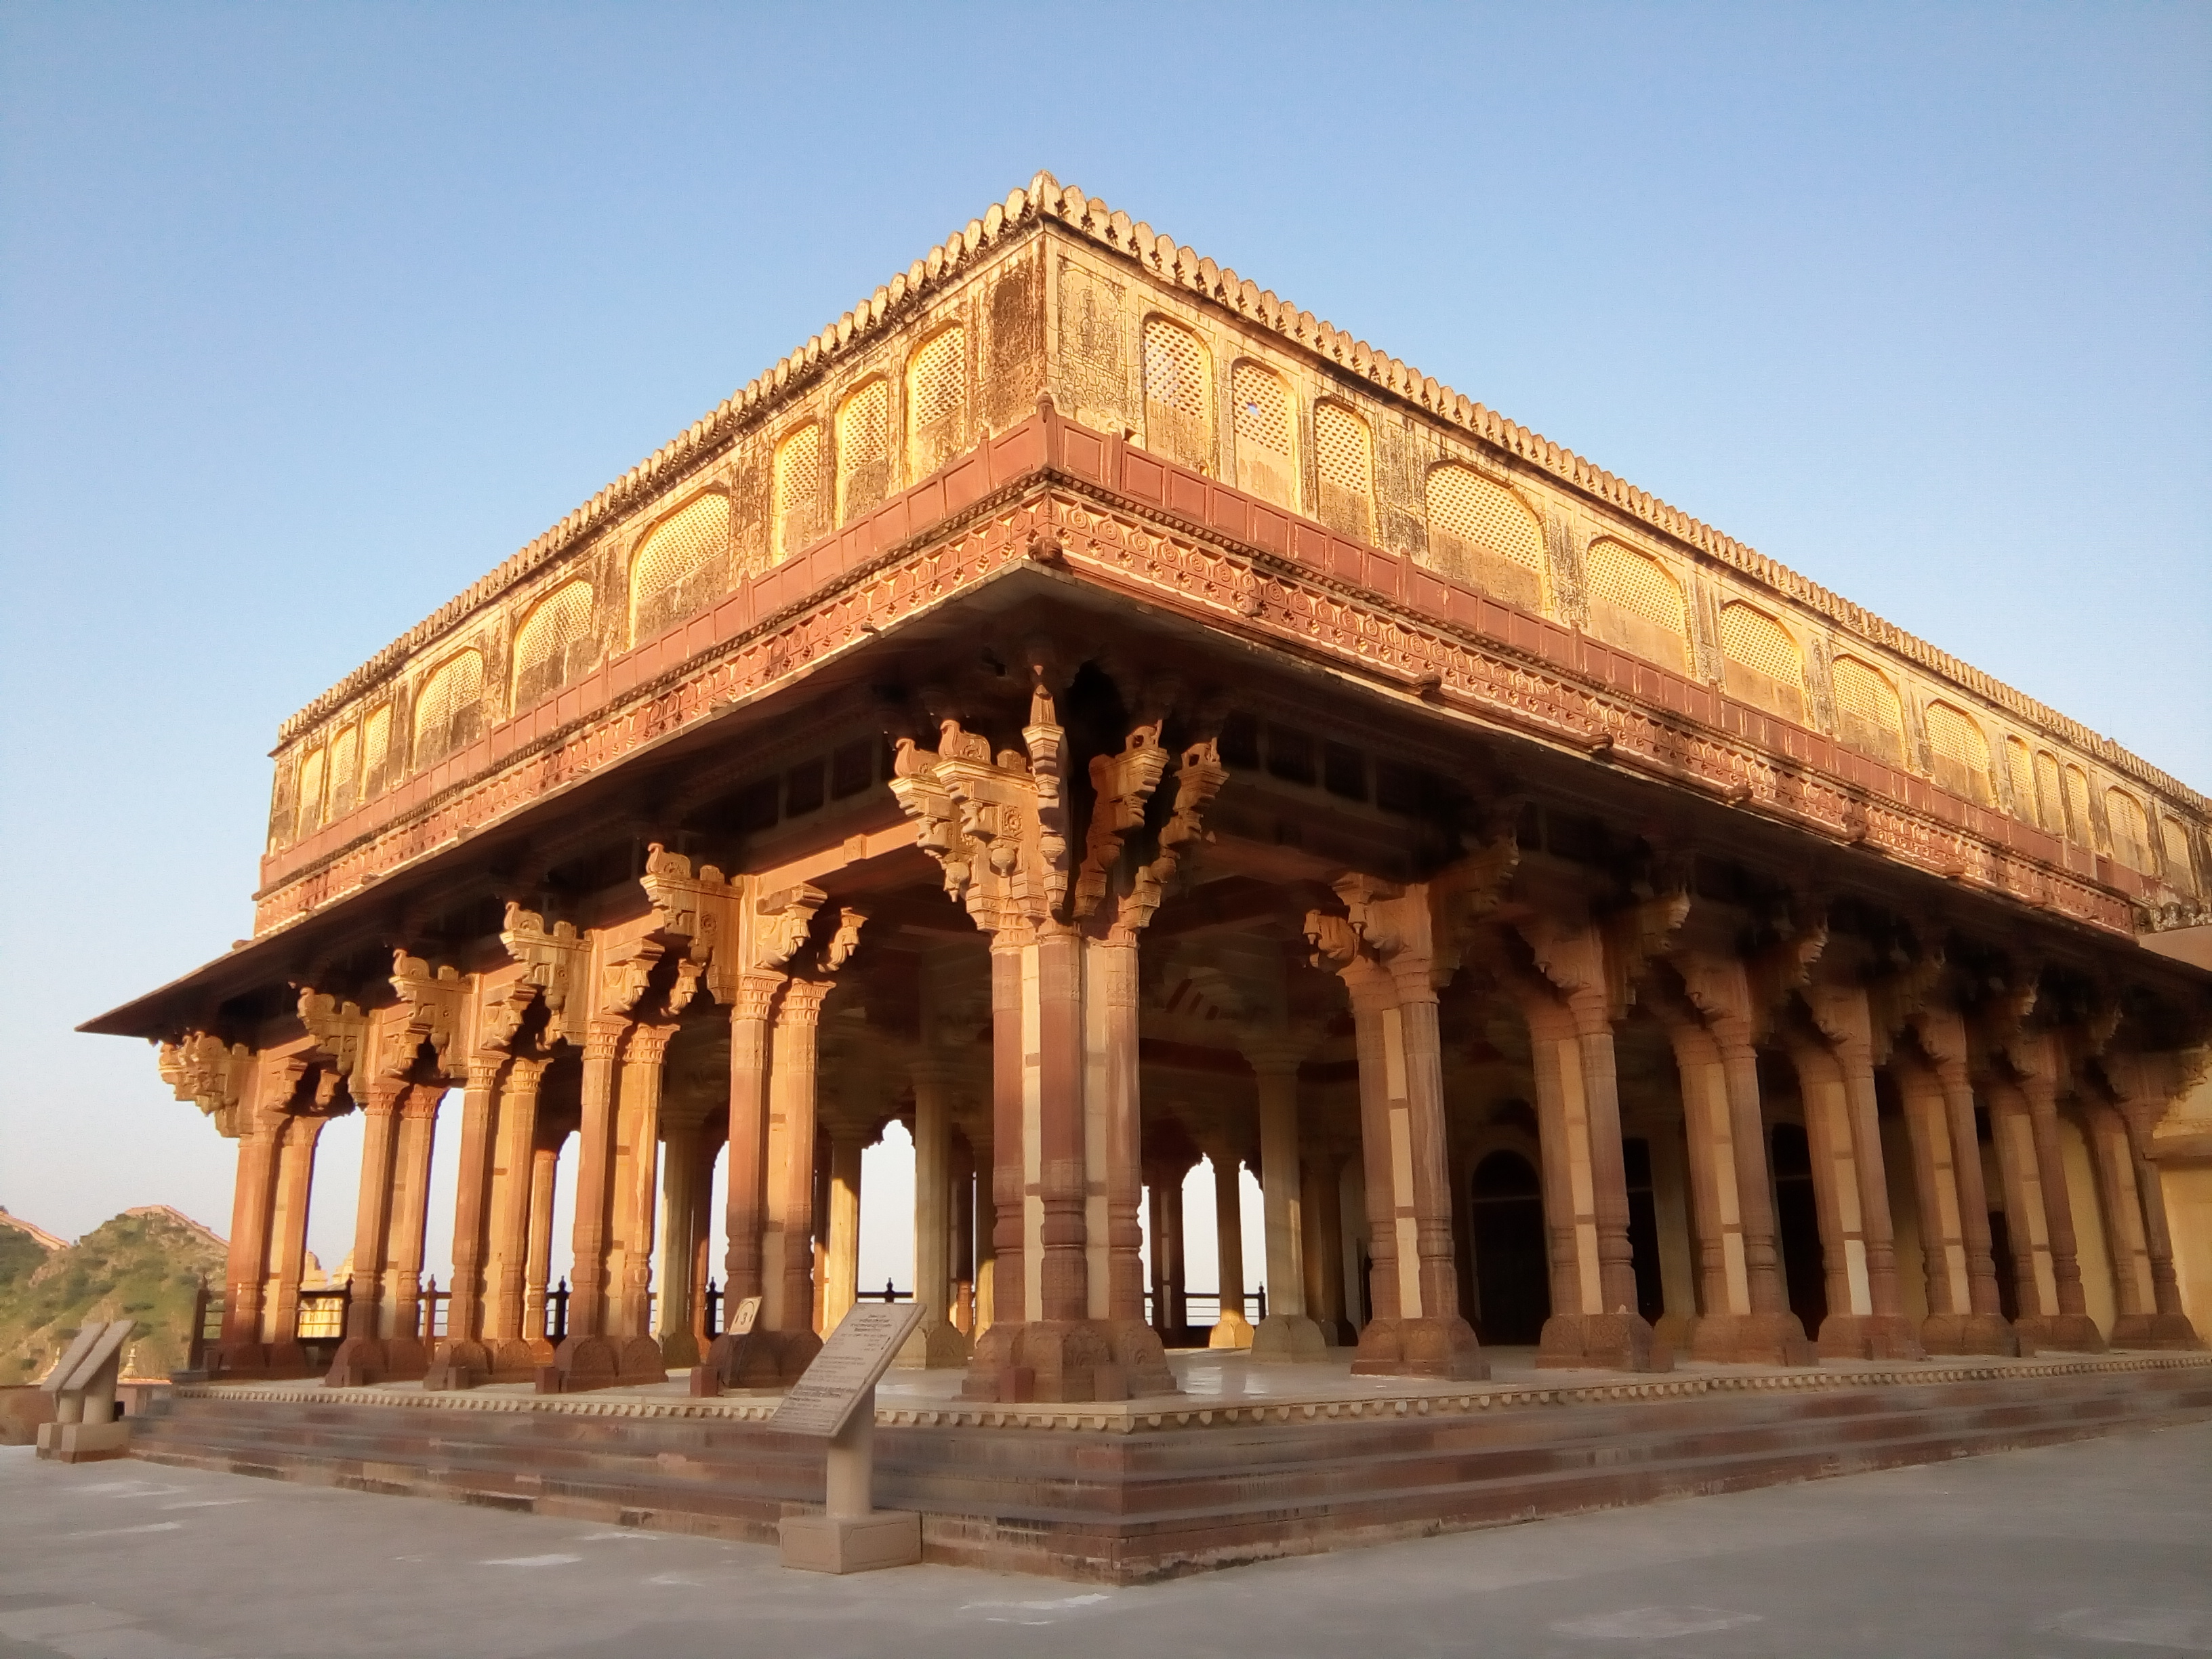 The Diwan-i-Am (Hall of Public Audience) in Amer fort Jaipur